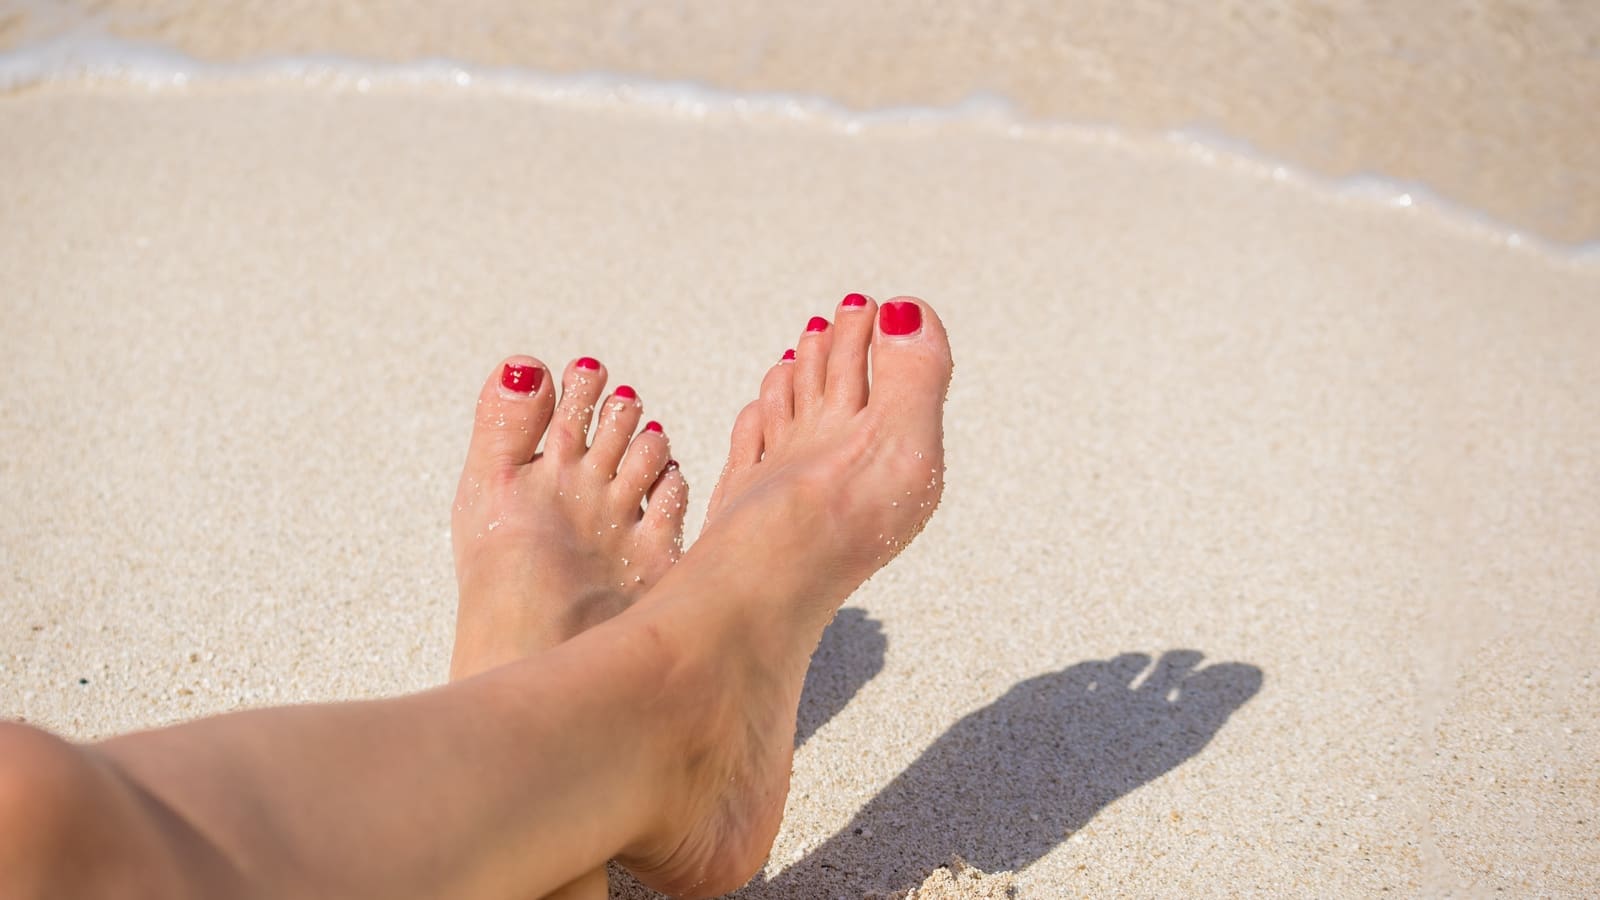 Our top tips to take care of your feet